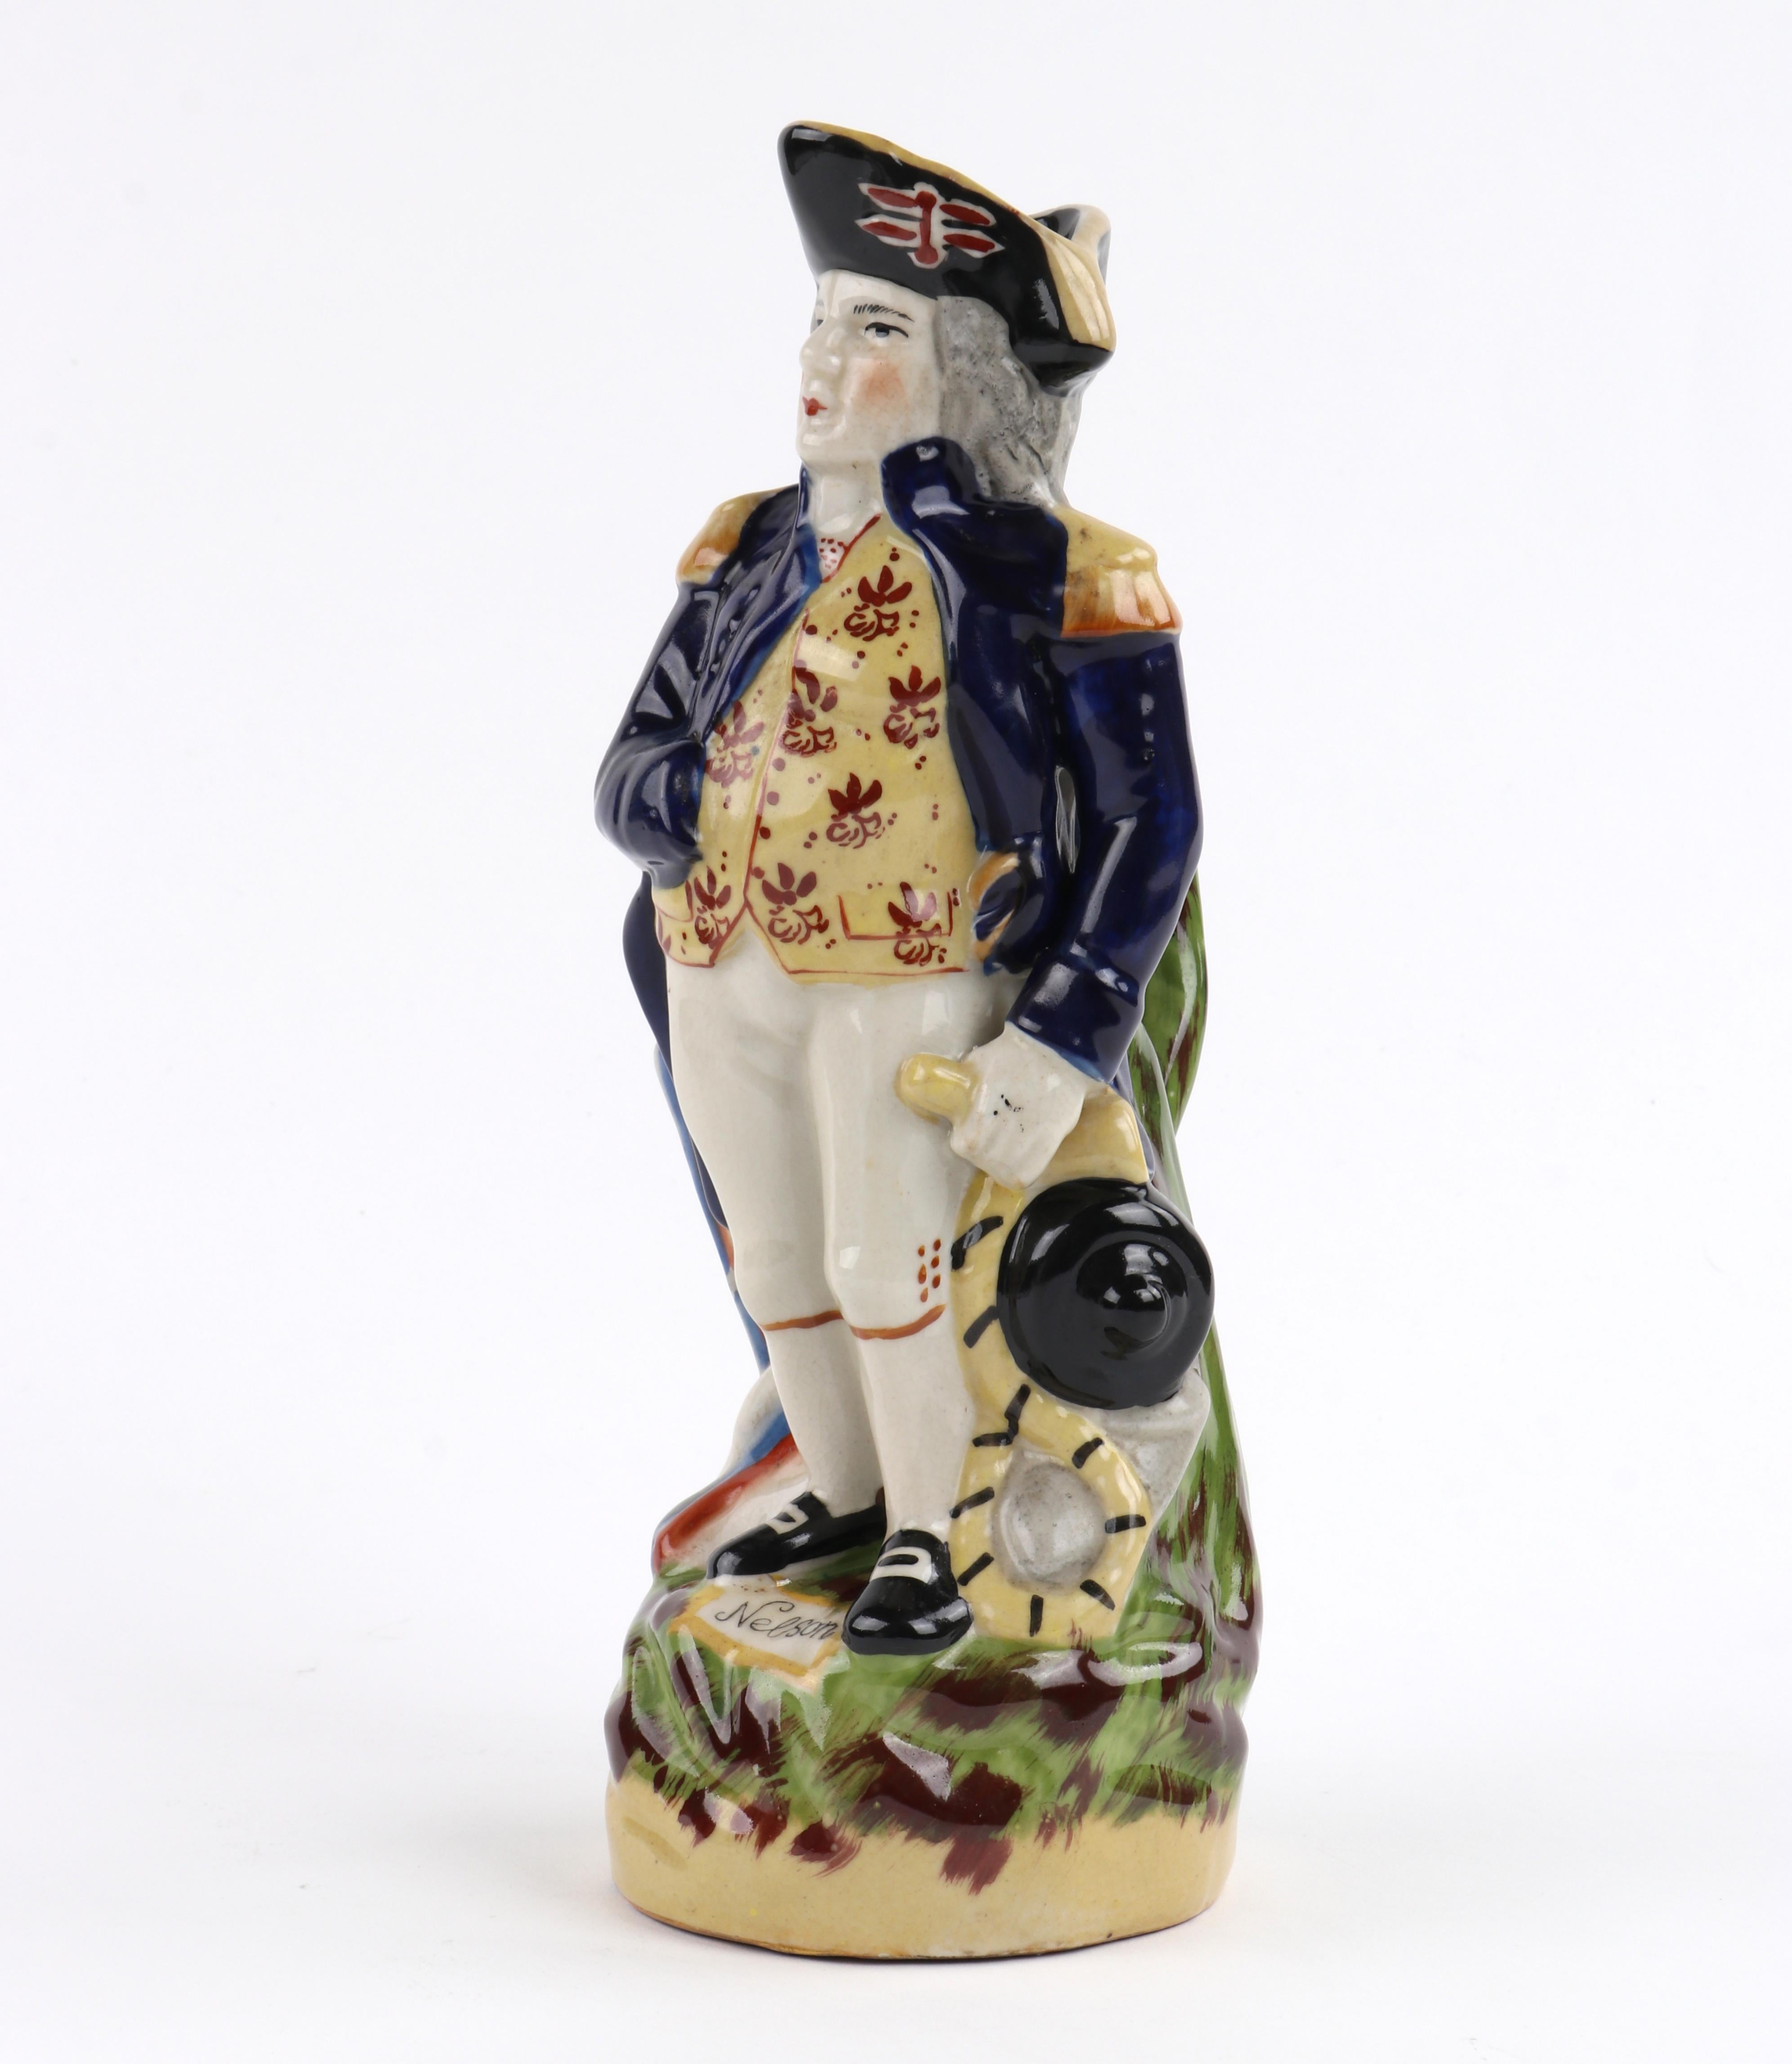 Antique Staffordshire Lord Horatio Nelson Hand Painted Toby Jug Pitcher Figure en vente 1